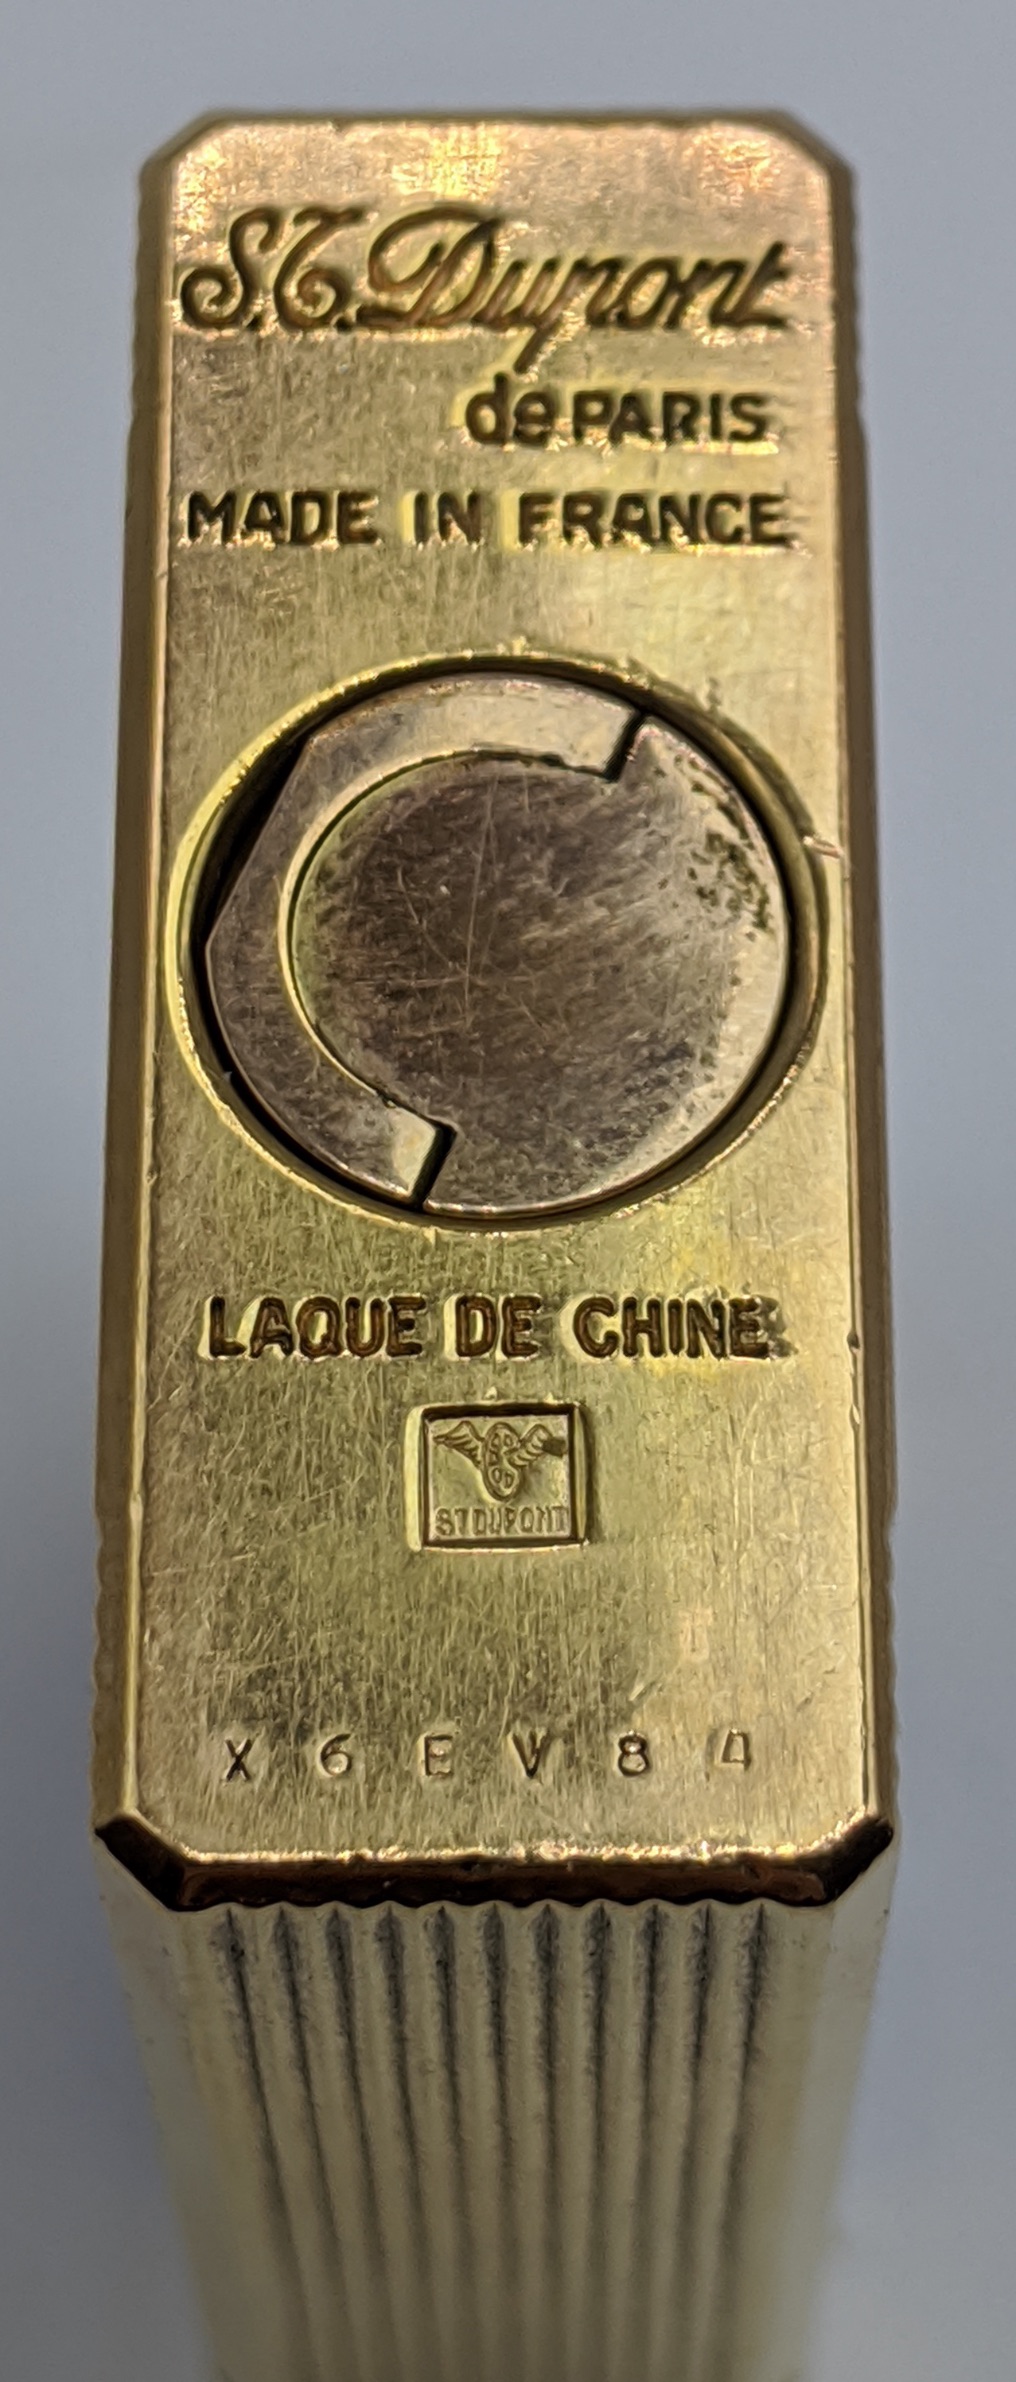 S.T. Dupont gold plated lighter, laque de chine edition - Image 2 of 4